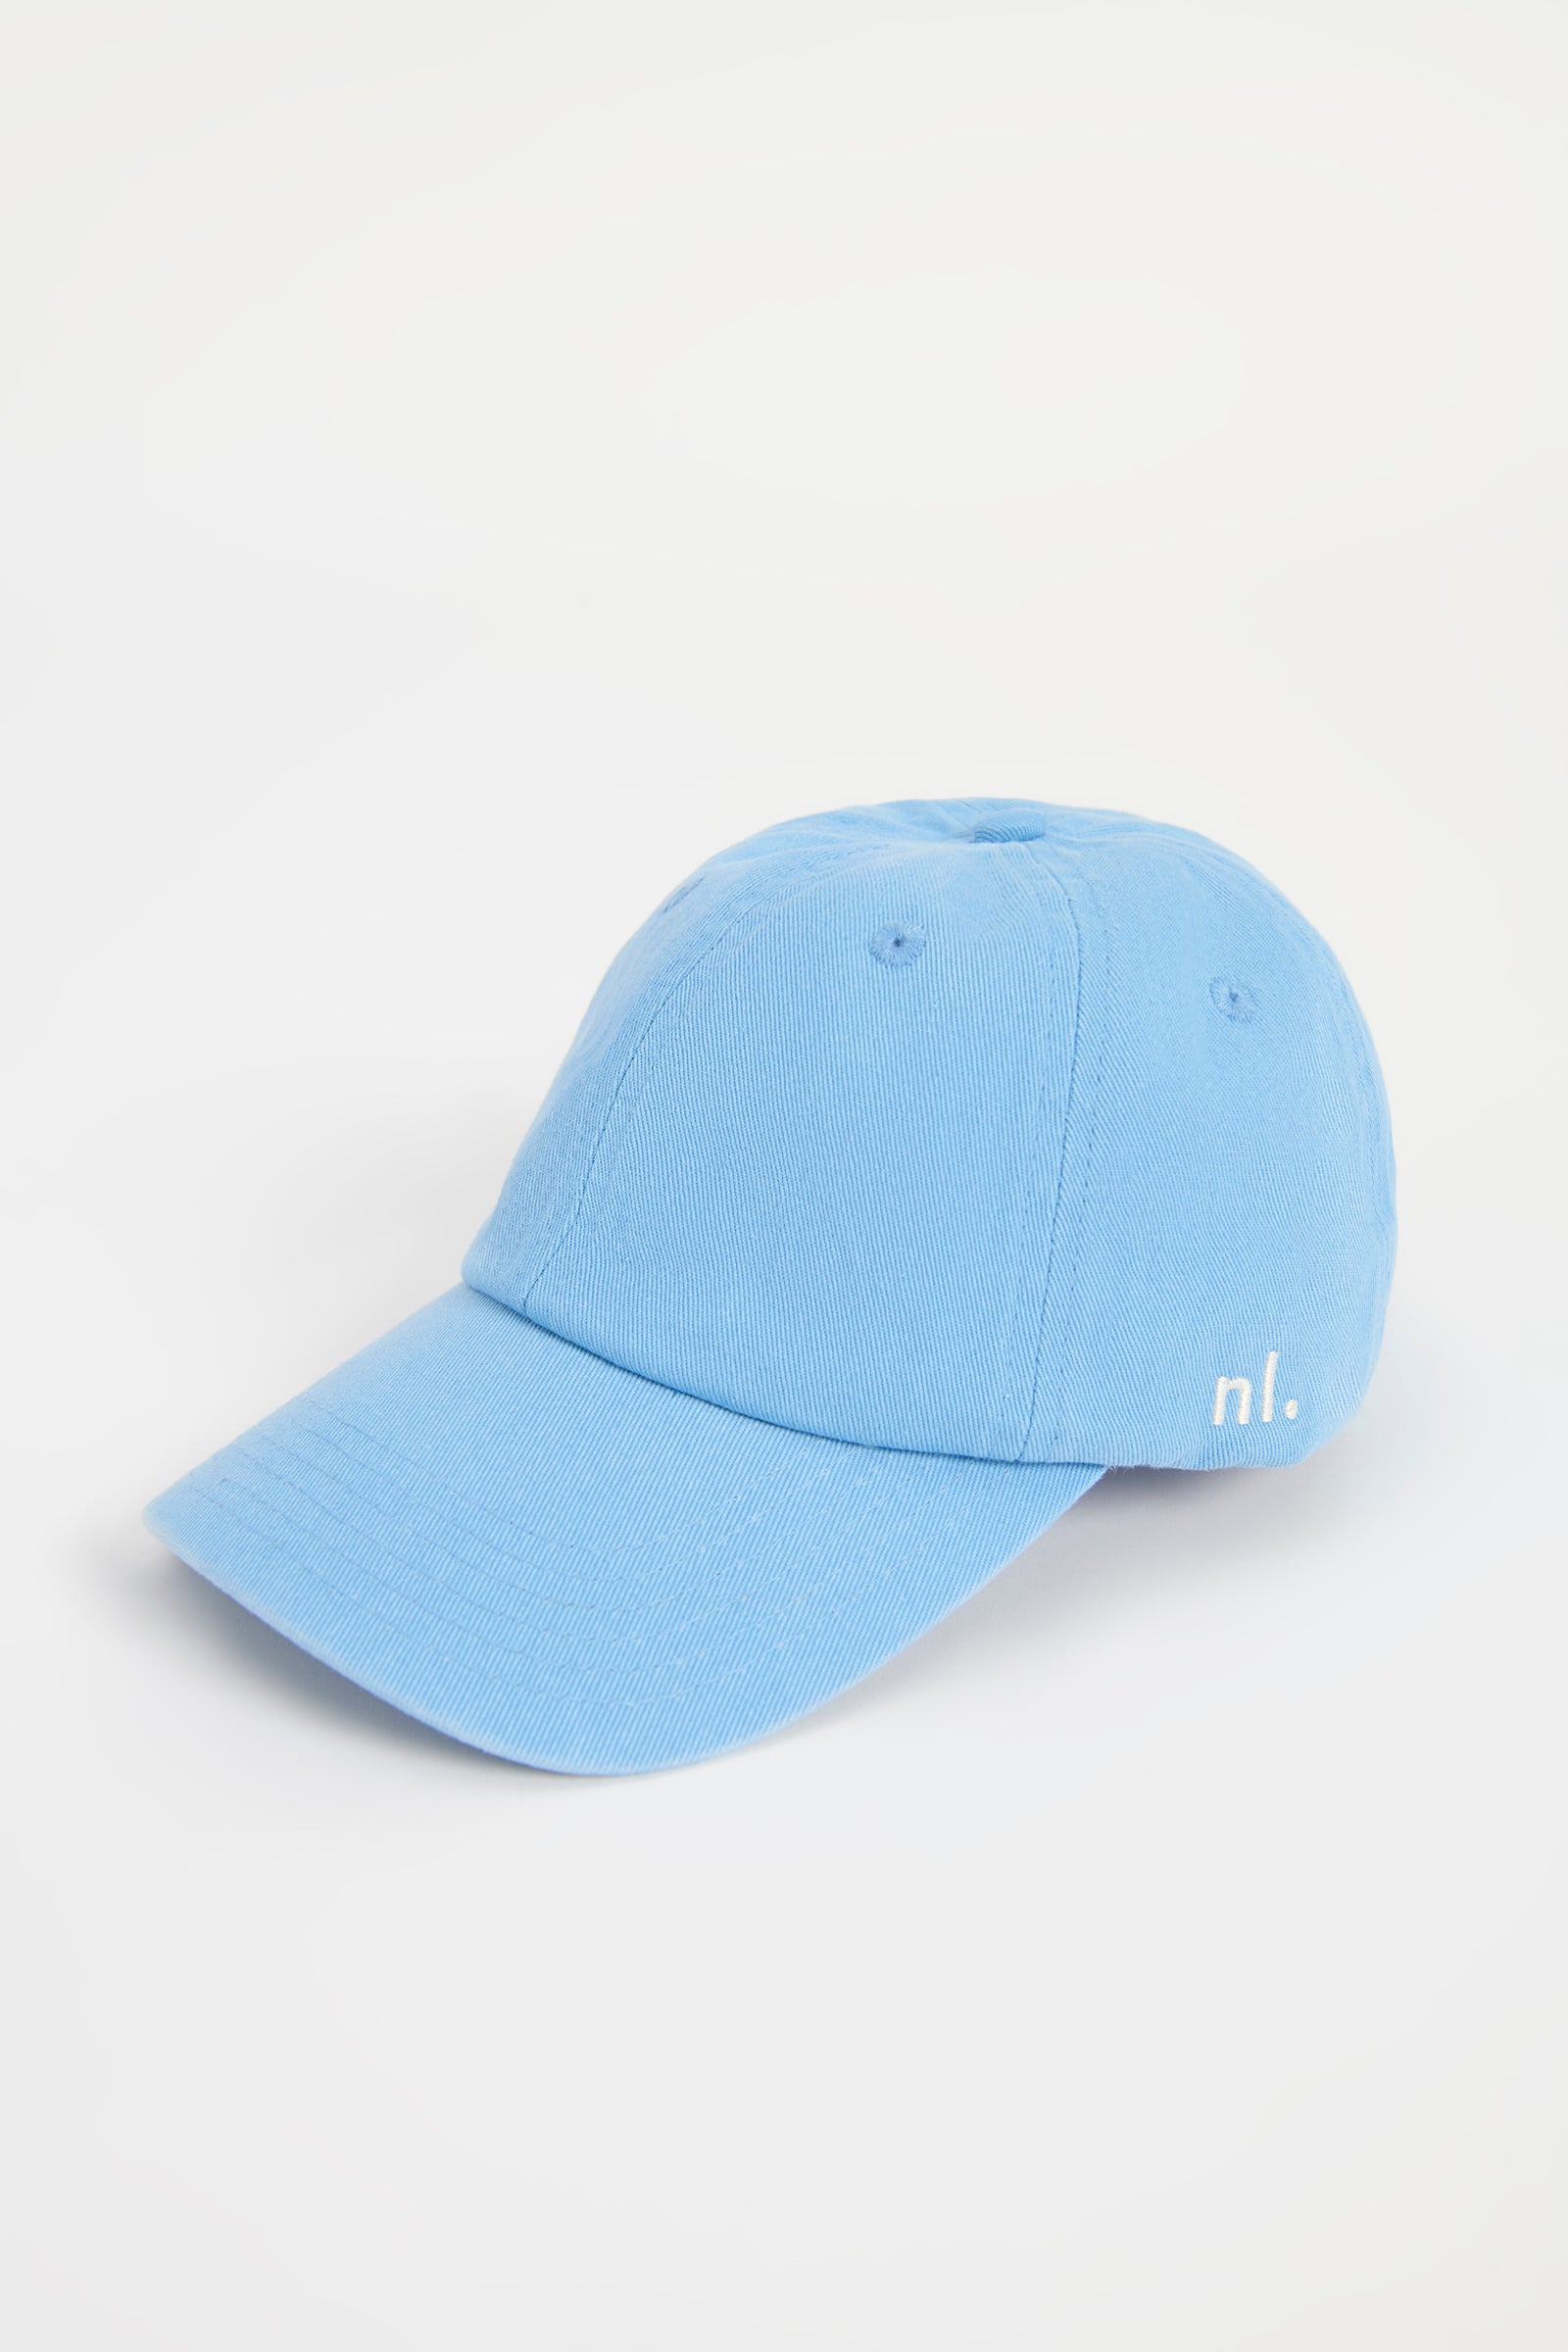 Nude Lucy Nude Classic Cap In a Blue Horizon Colour